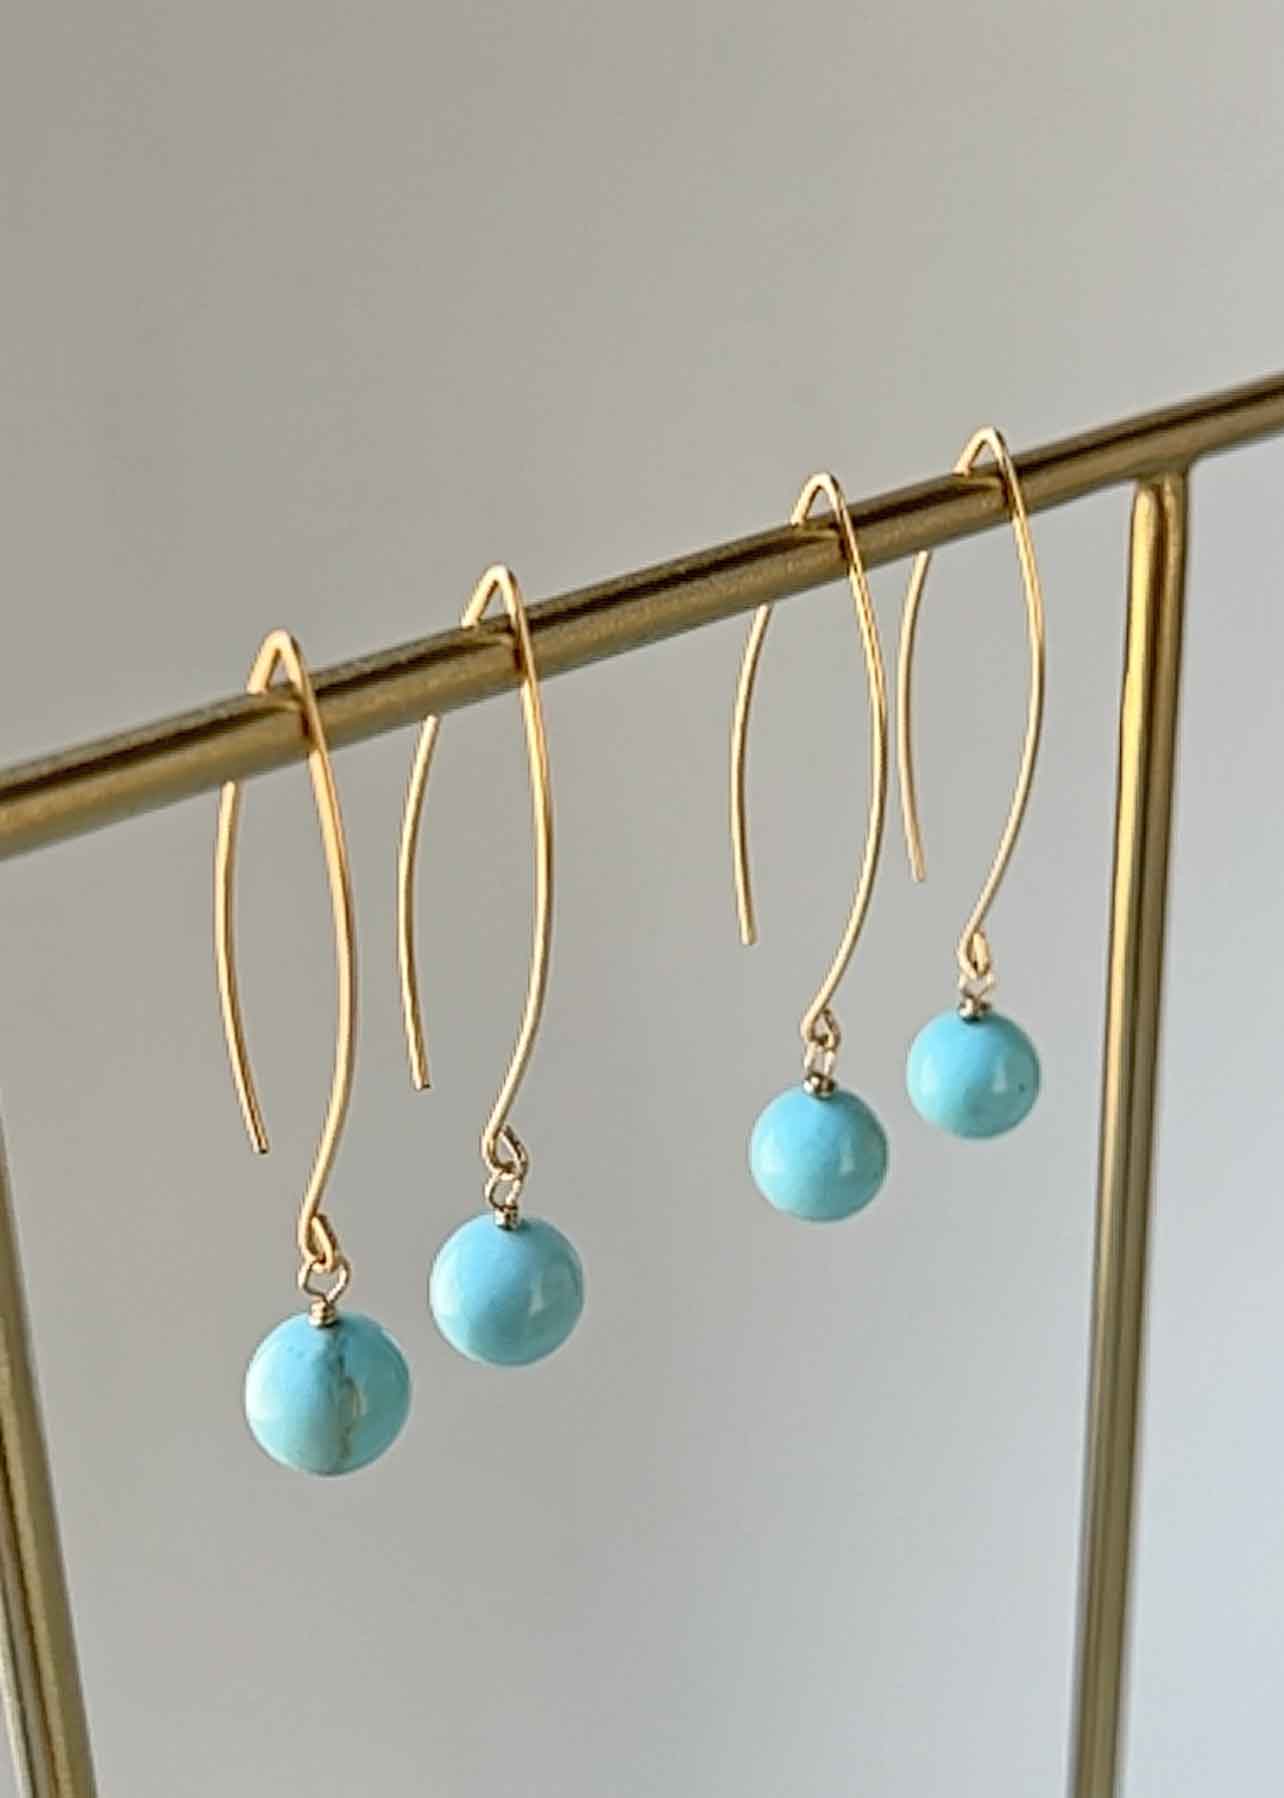 Long Turquoise Earrings Dangle, 14k Gold Filled, Rose Gold Filled Earrings, Minimalist Earrings, Unique Handmade Jewelry Gift for Her